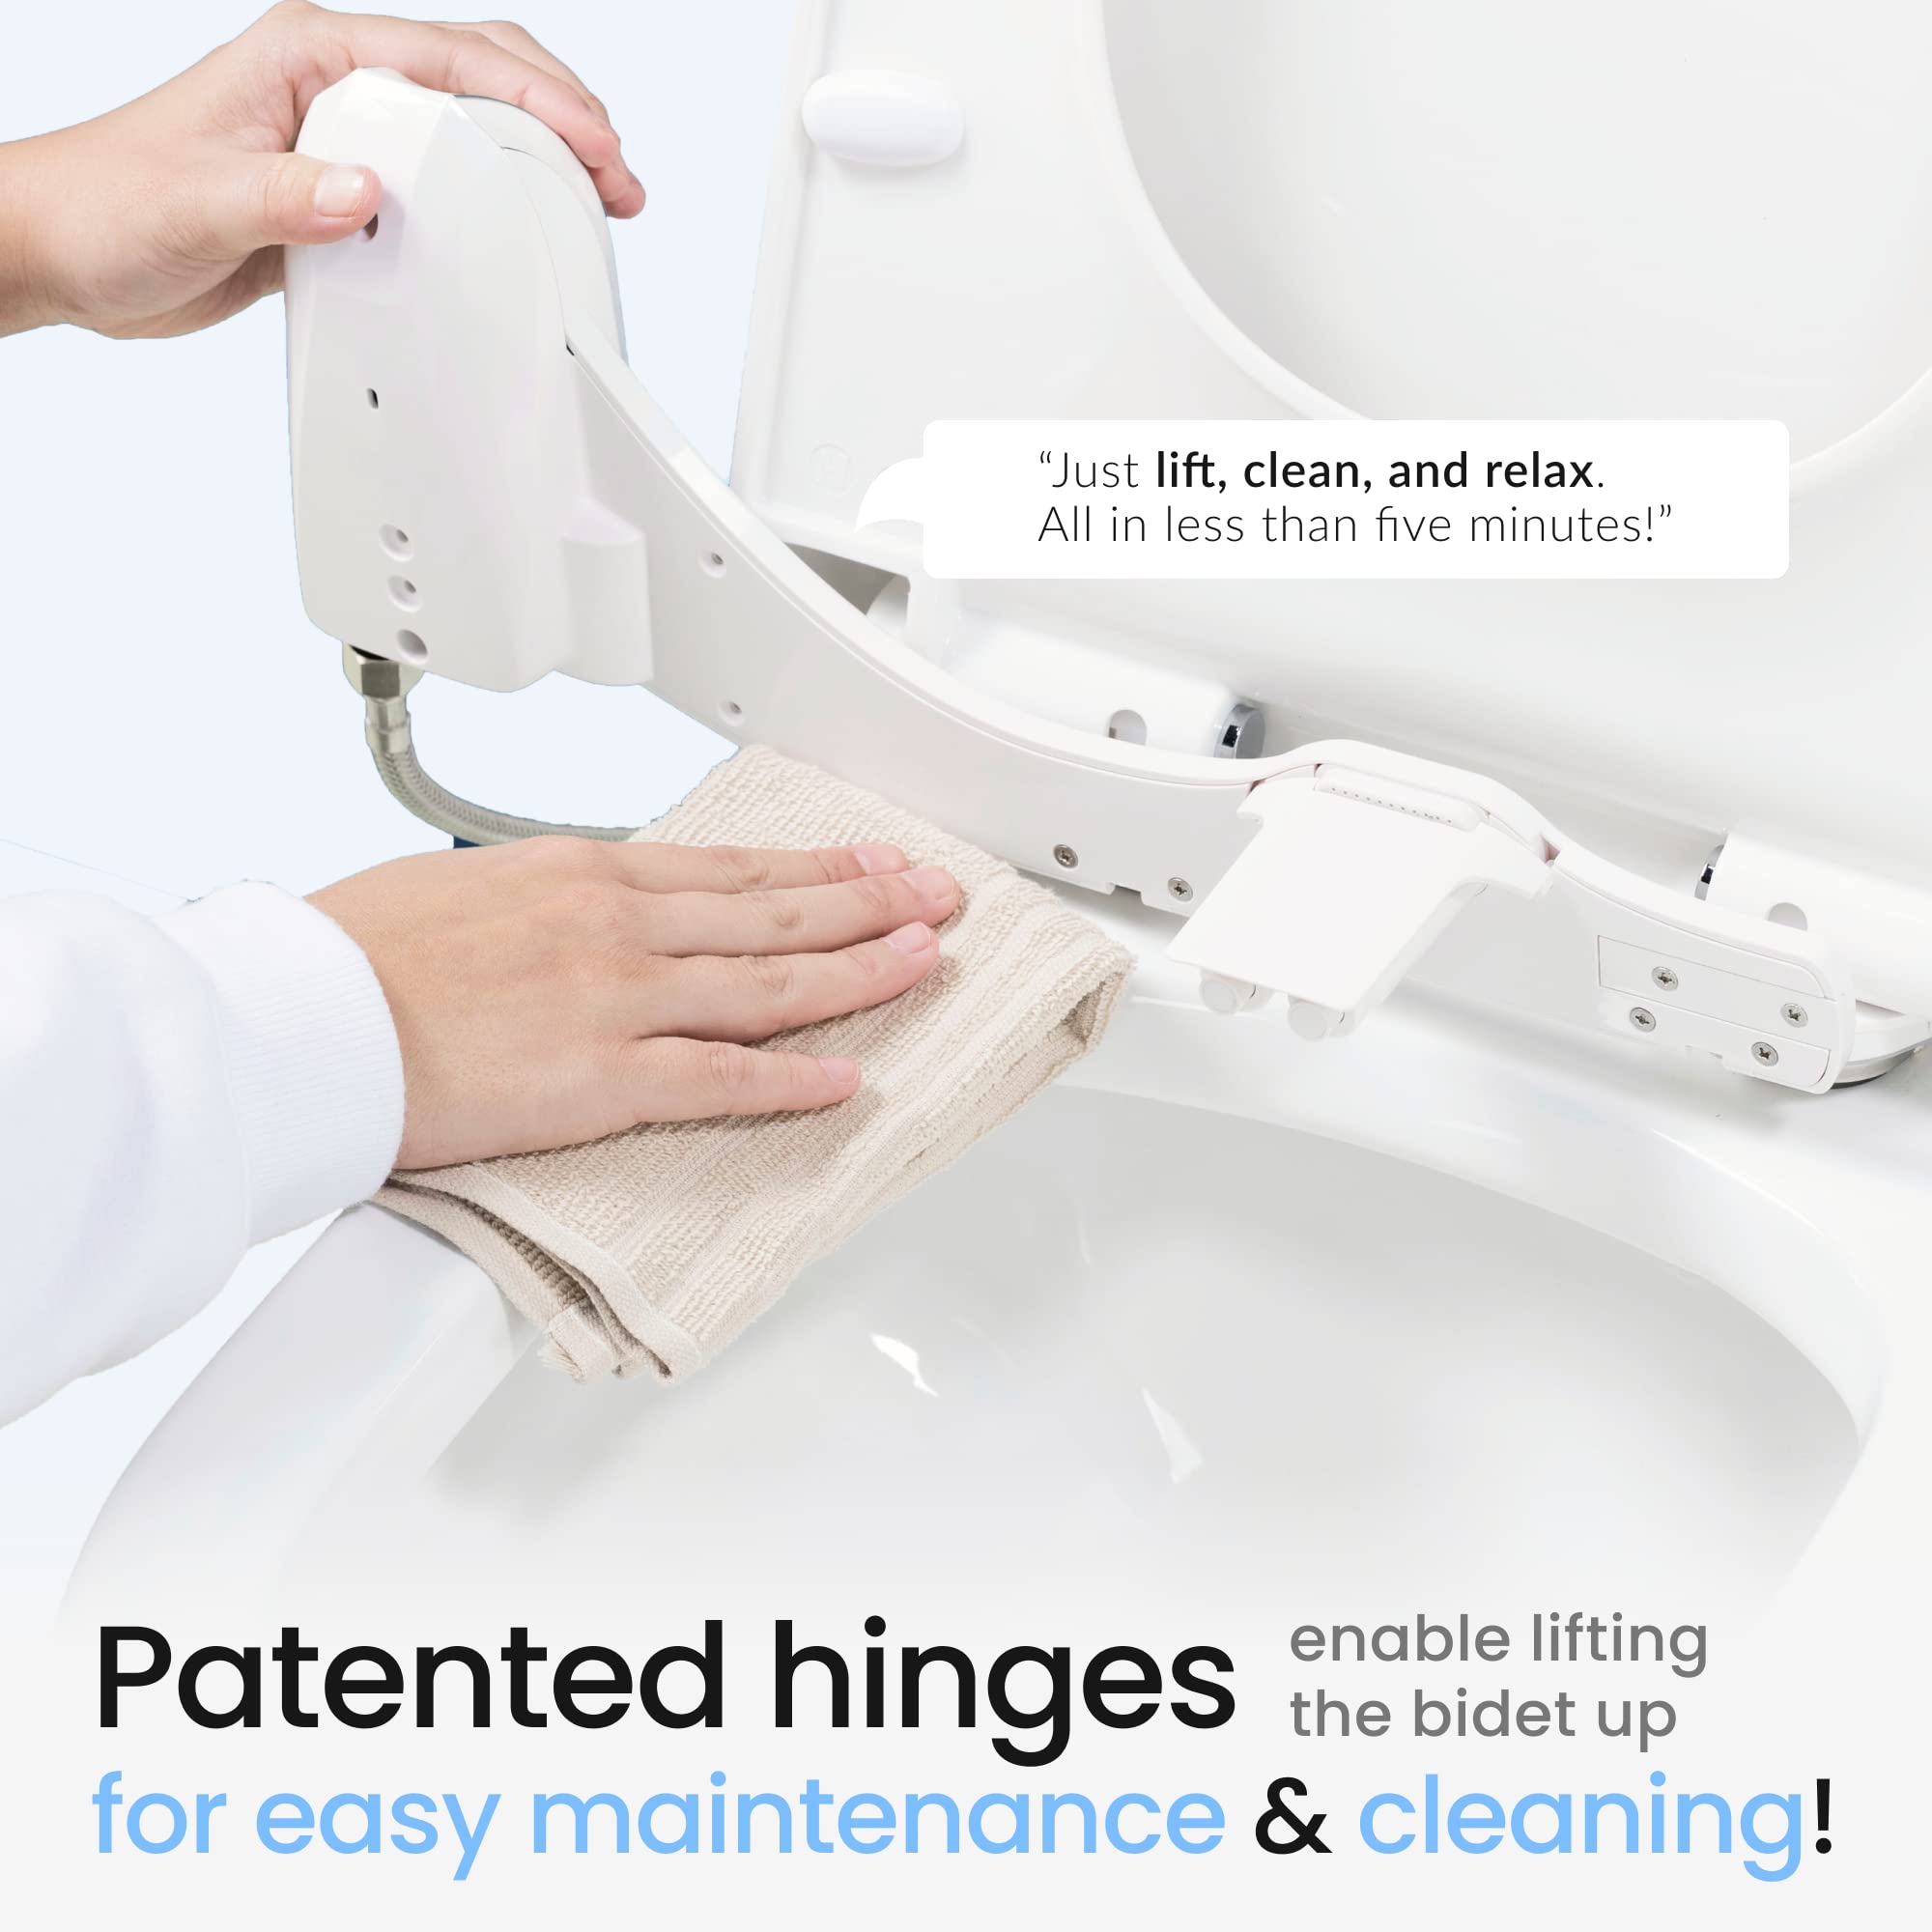 LUXE Bidet NEO 320 Plus – Next-Generation Warm Water Bidet Toilet Seat Attachment with Innovative EZ-Lift Hinges, Dual Nozzles, and 360° Self-Cleaning Mode (Chrome)